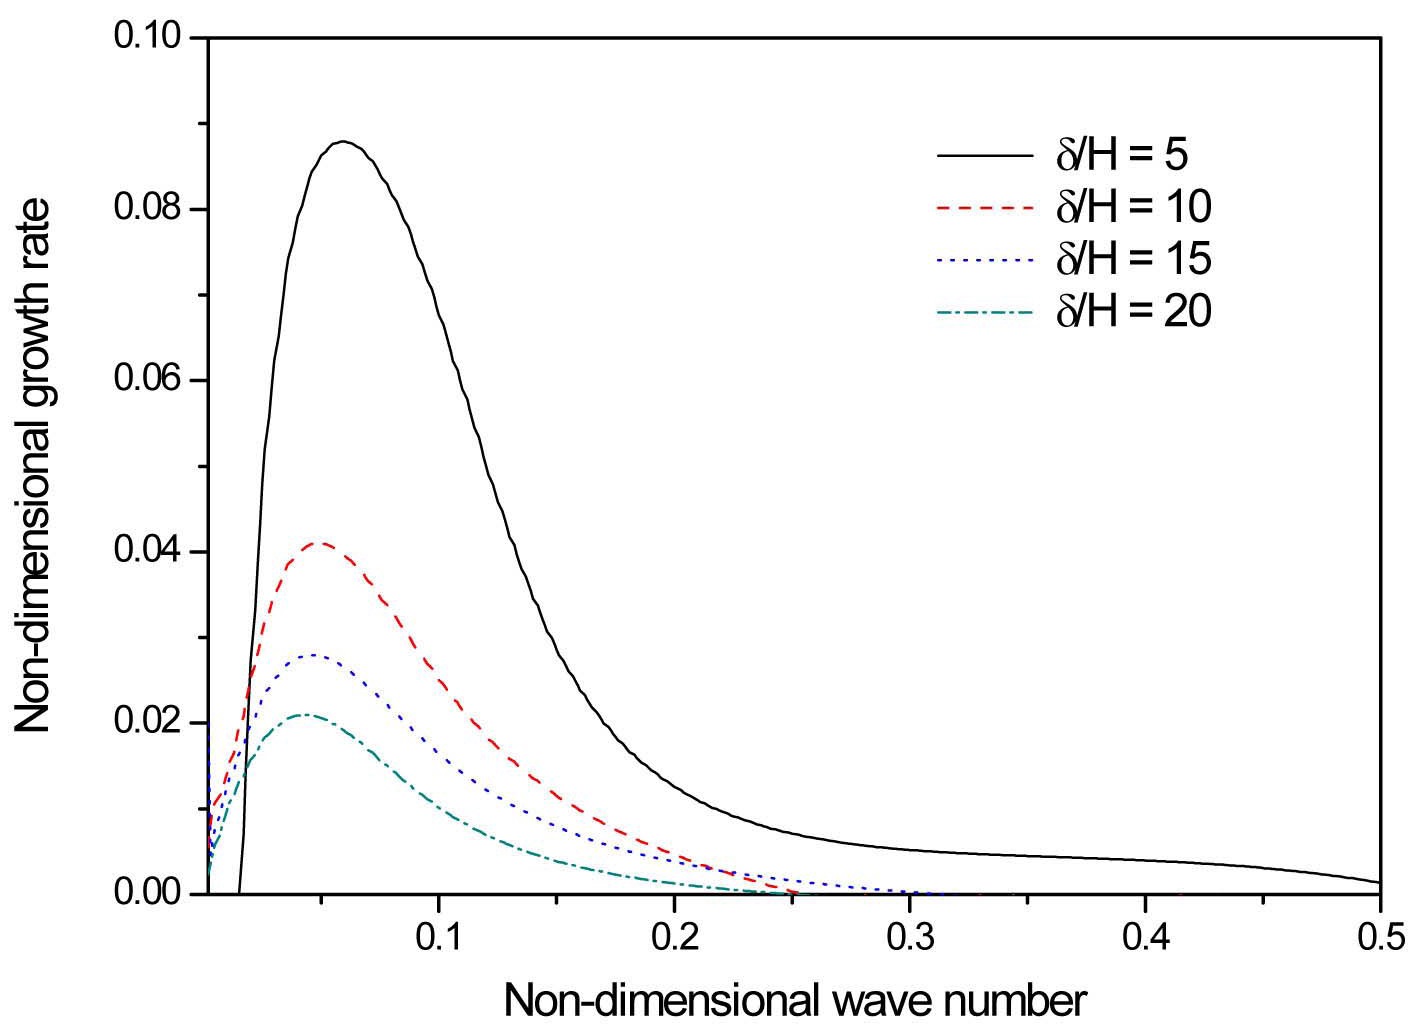 Non-dimensionless Temporal Growth rate as a
Function of Non-dimensional Wavenumber for T=400℃,
P=0.15 MPa, ？1=1m/sec, U2,M=10m/sec, H=0.05mm, and
different δ/H ratios